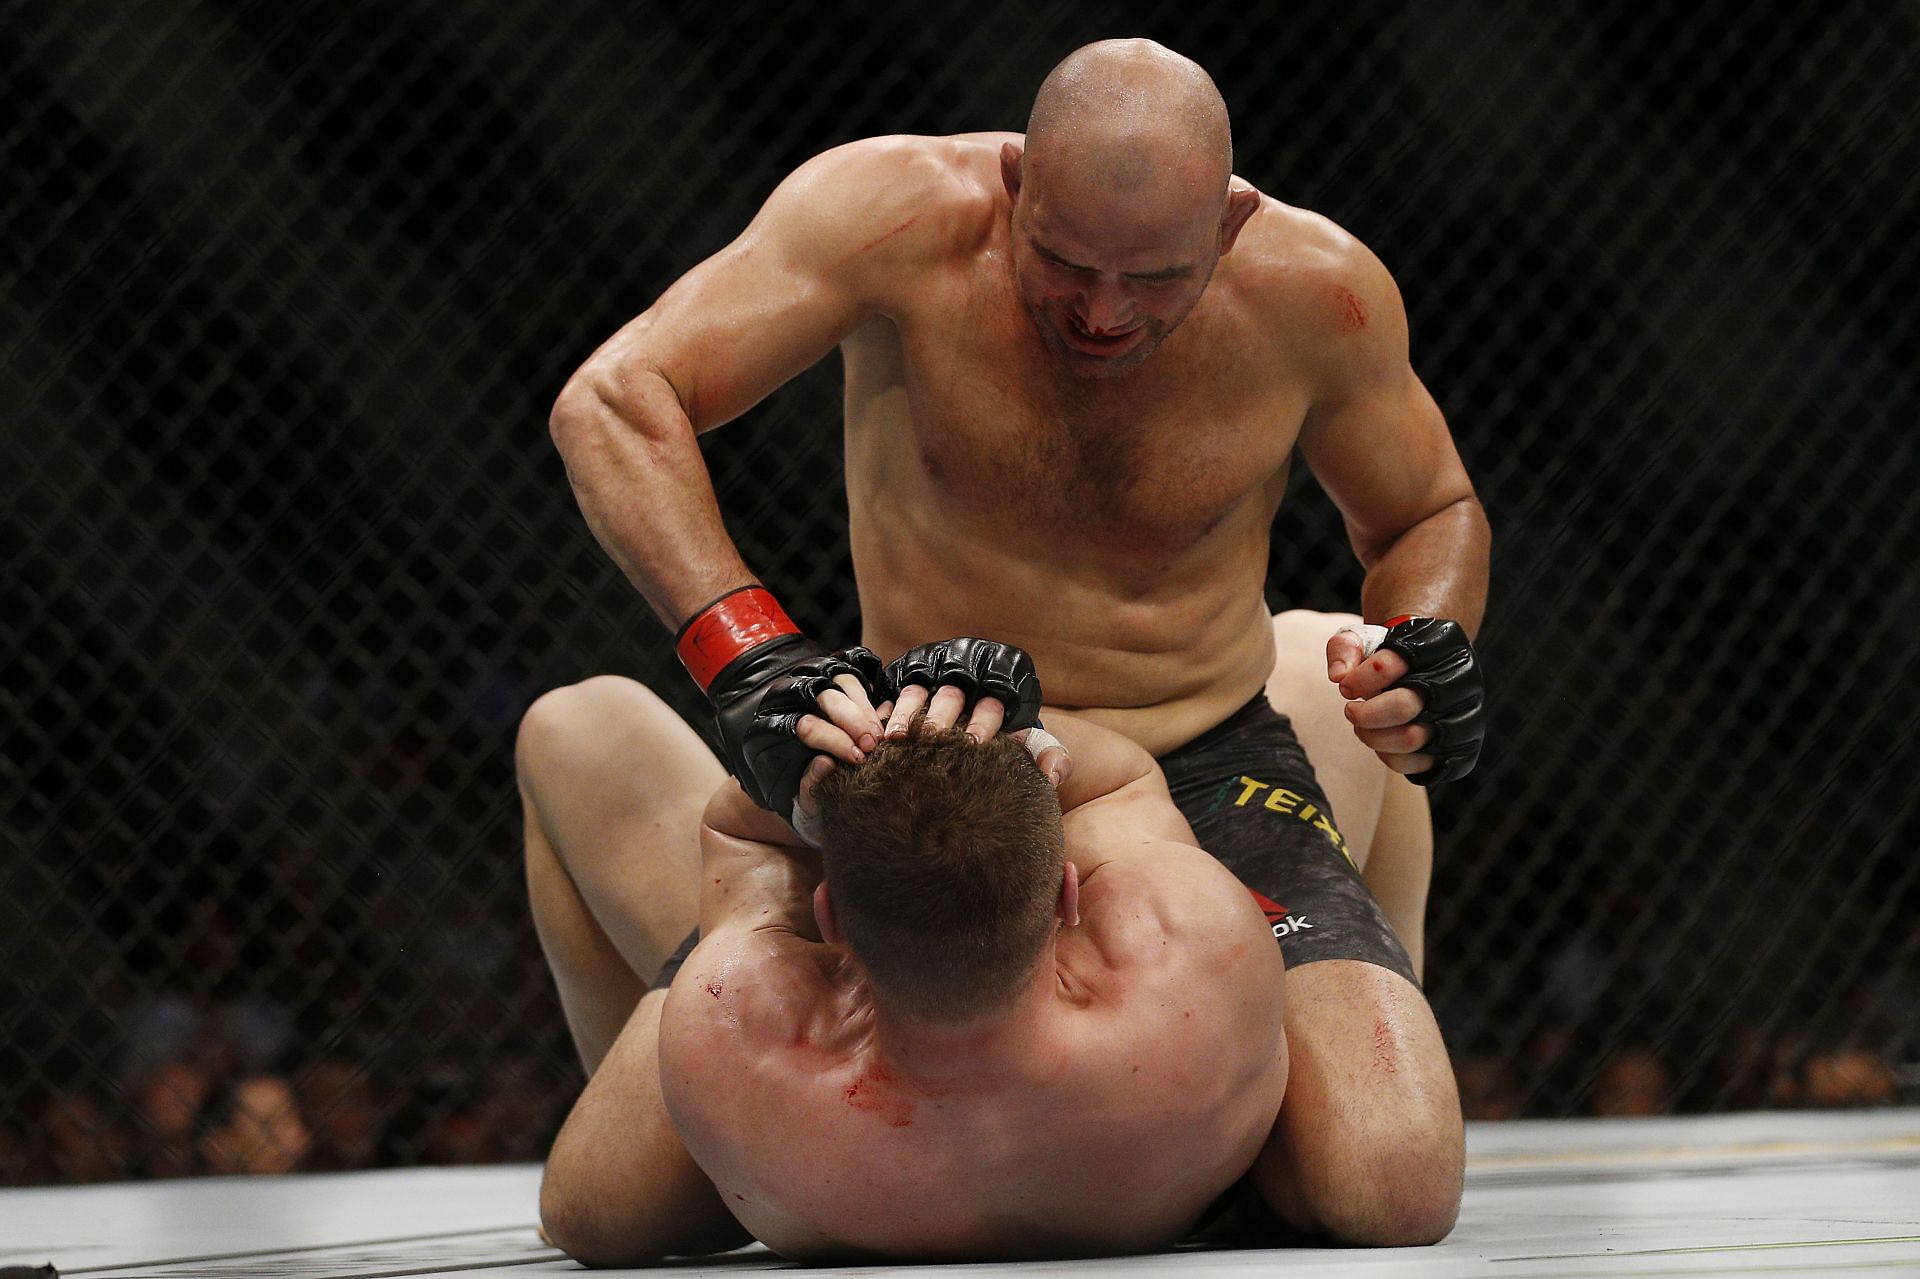 At 42 years old, father time could catch up with Glover Teixeira at any point